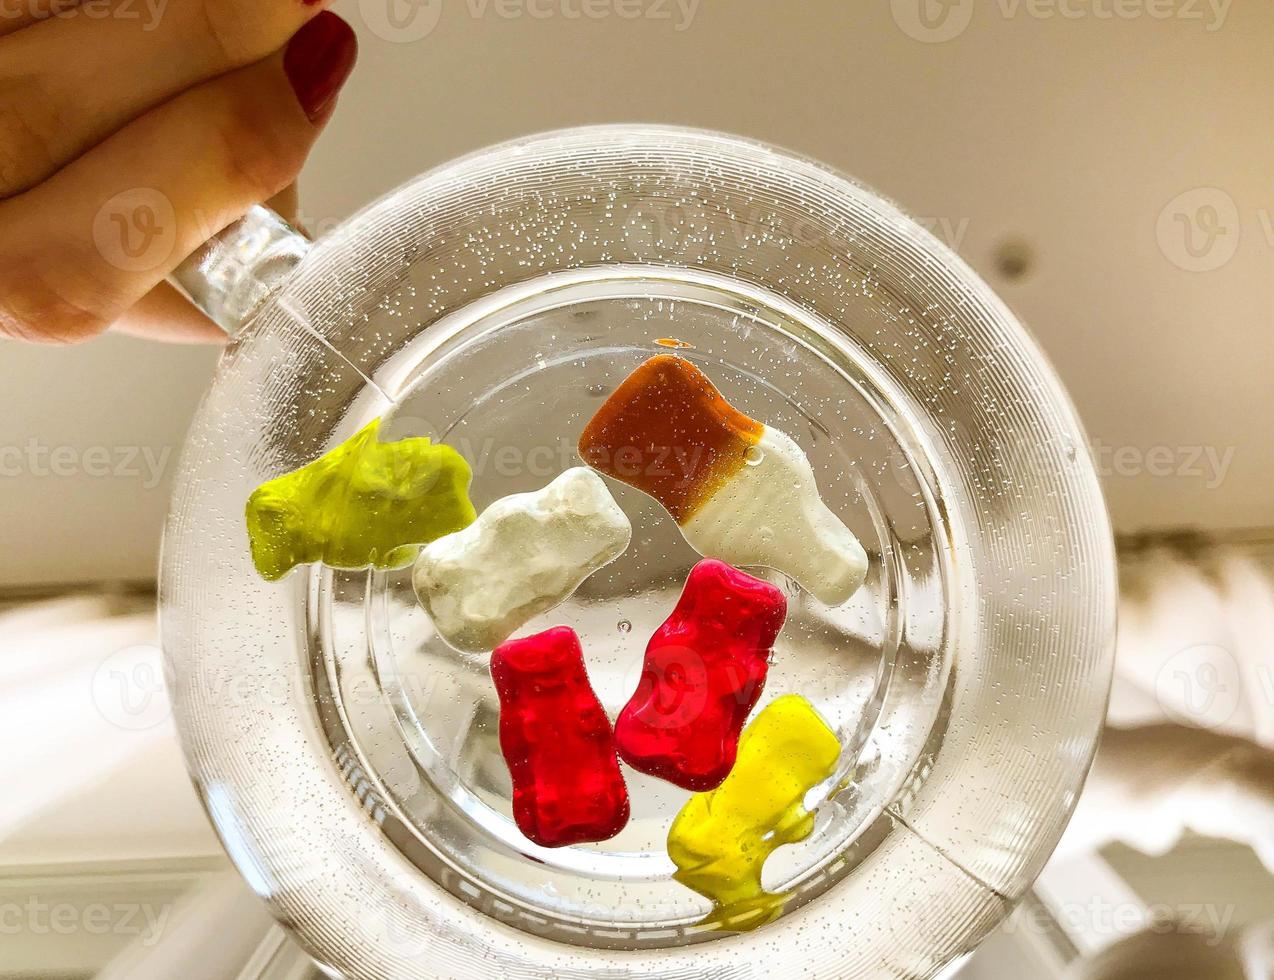 transparent mug, round and large, filled with water. at the bottom of the mug are gummy bears and bottles of lemonade. girl holding a mug in her hands. swimming pool for gelatin candy photo